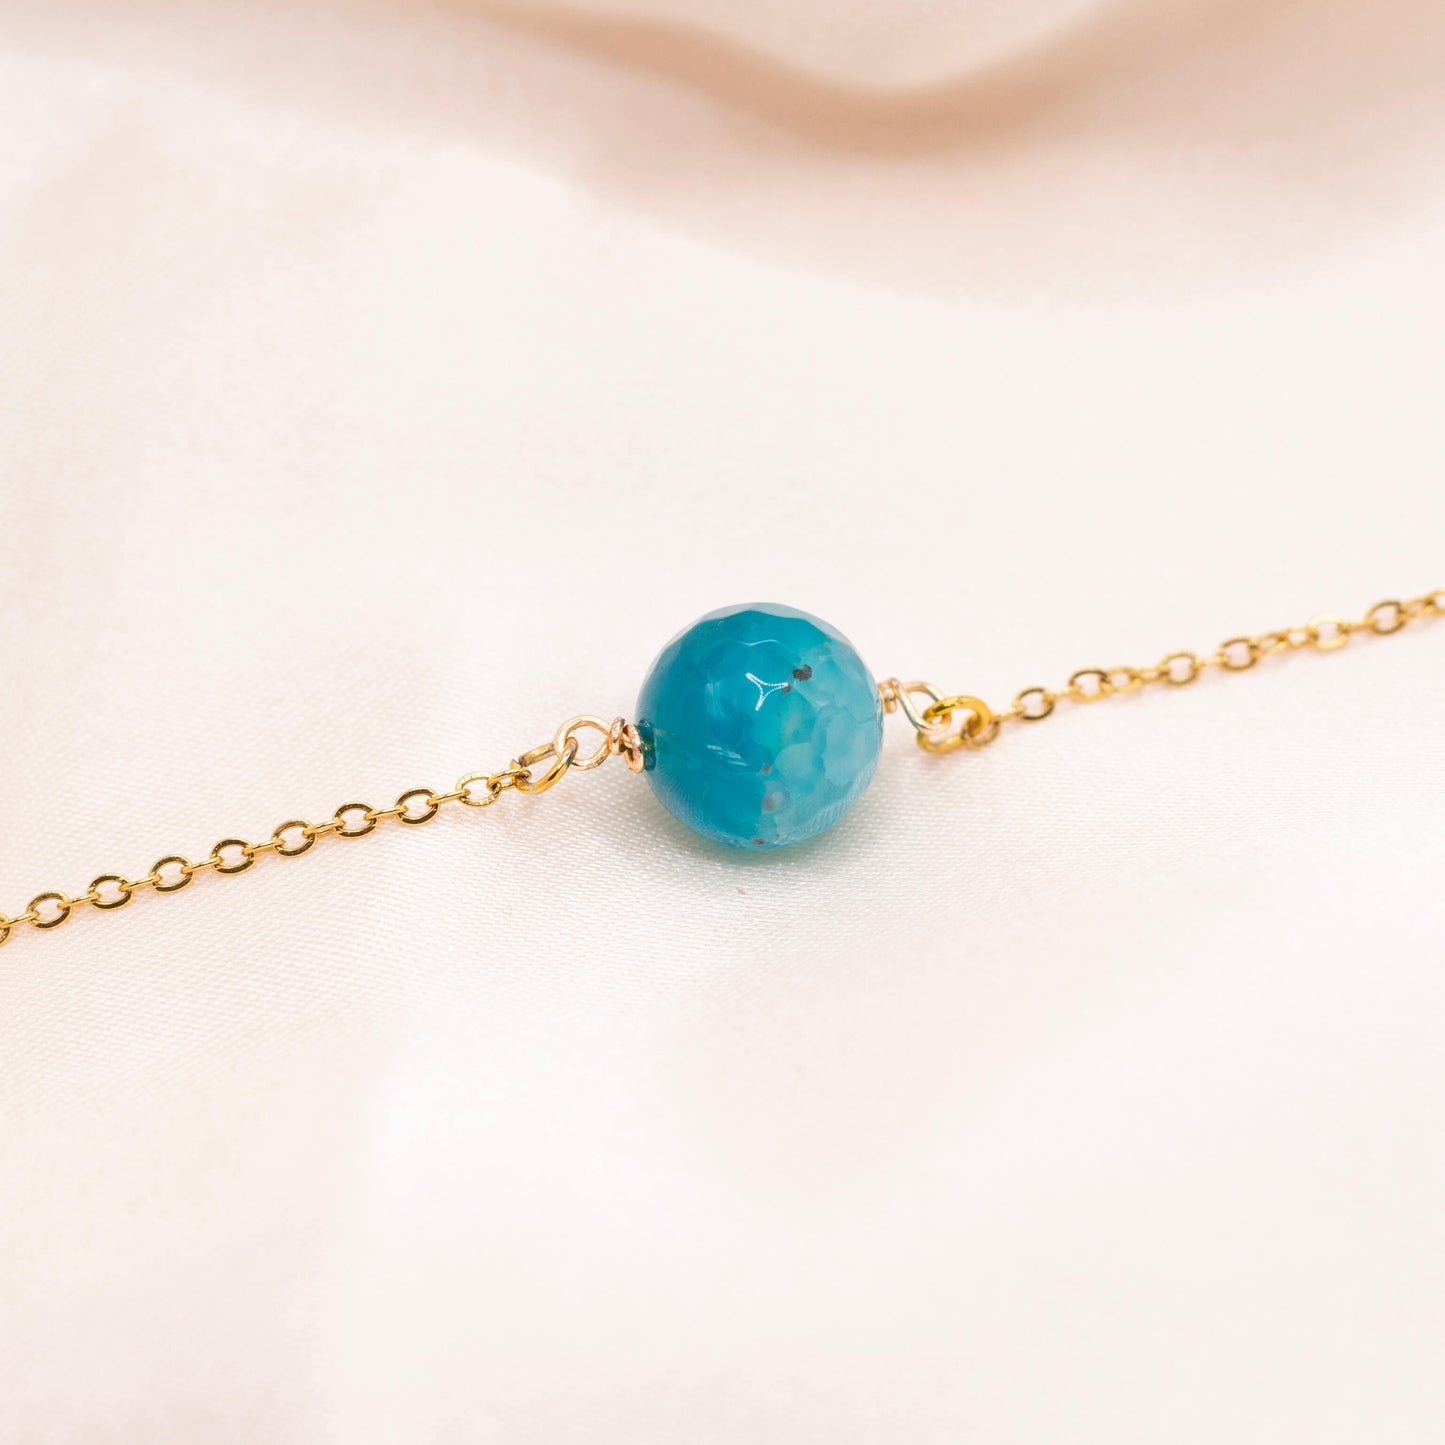 Blue gemstone bead necklace with dainty, gold-plated stainless steel chain.